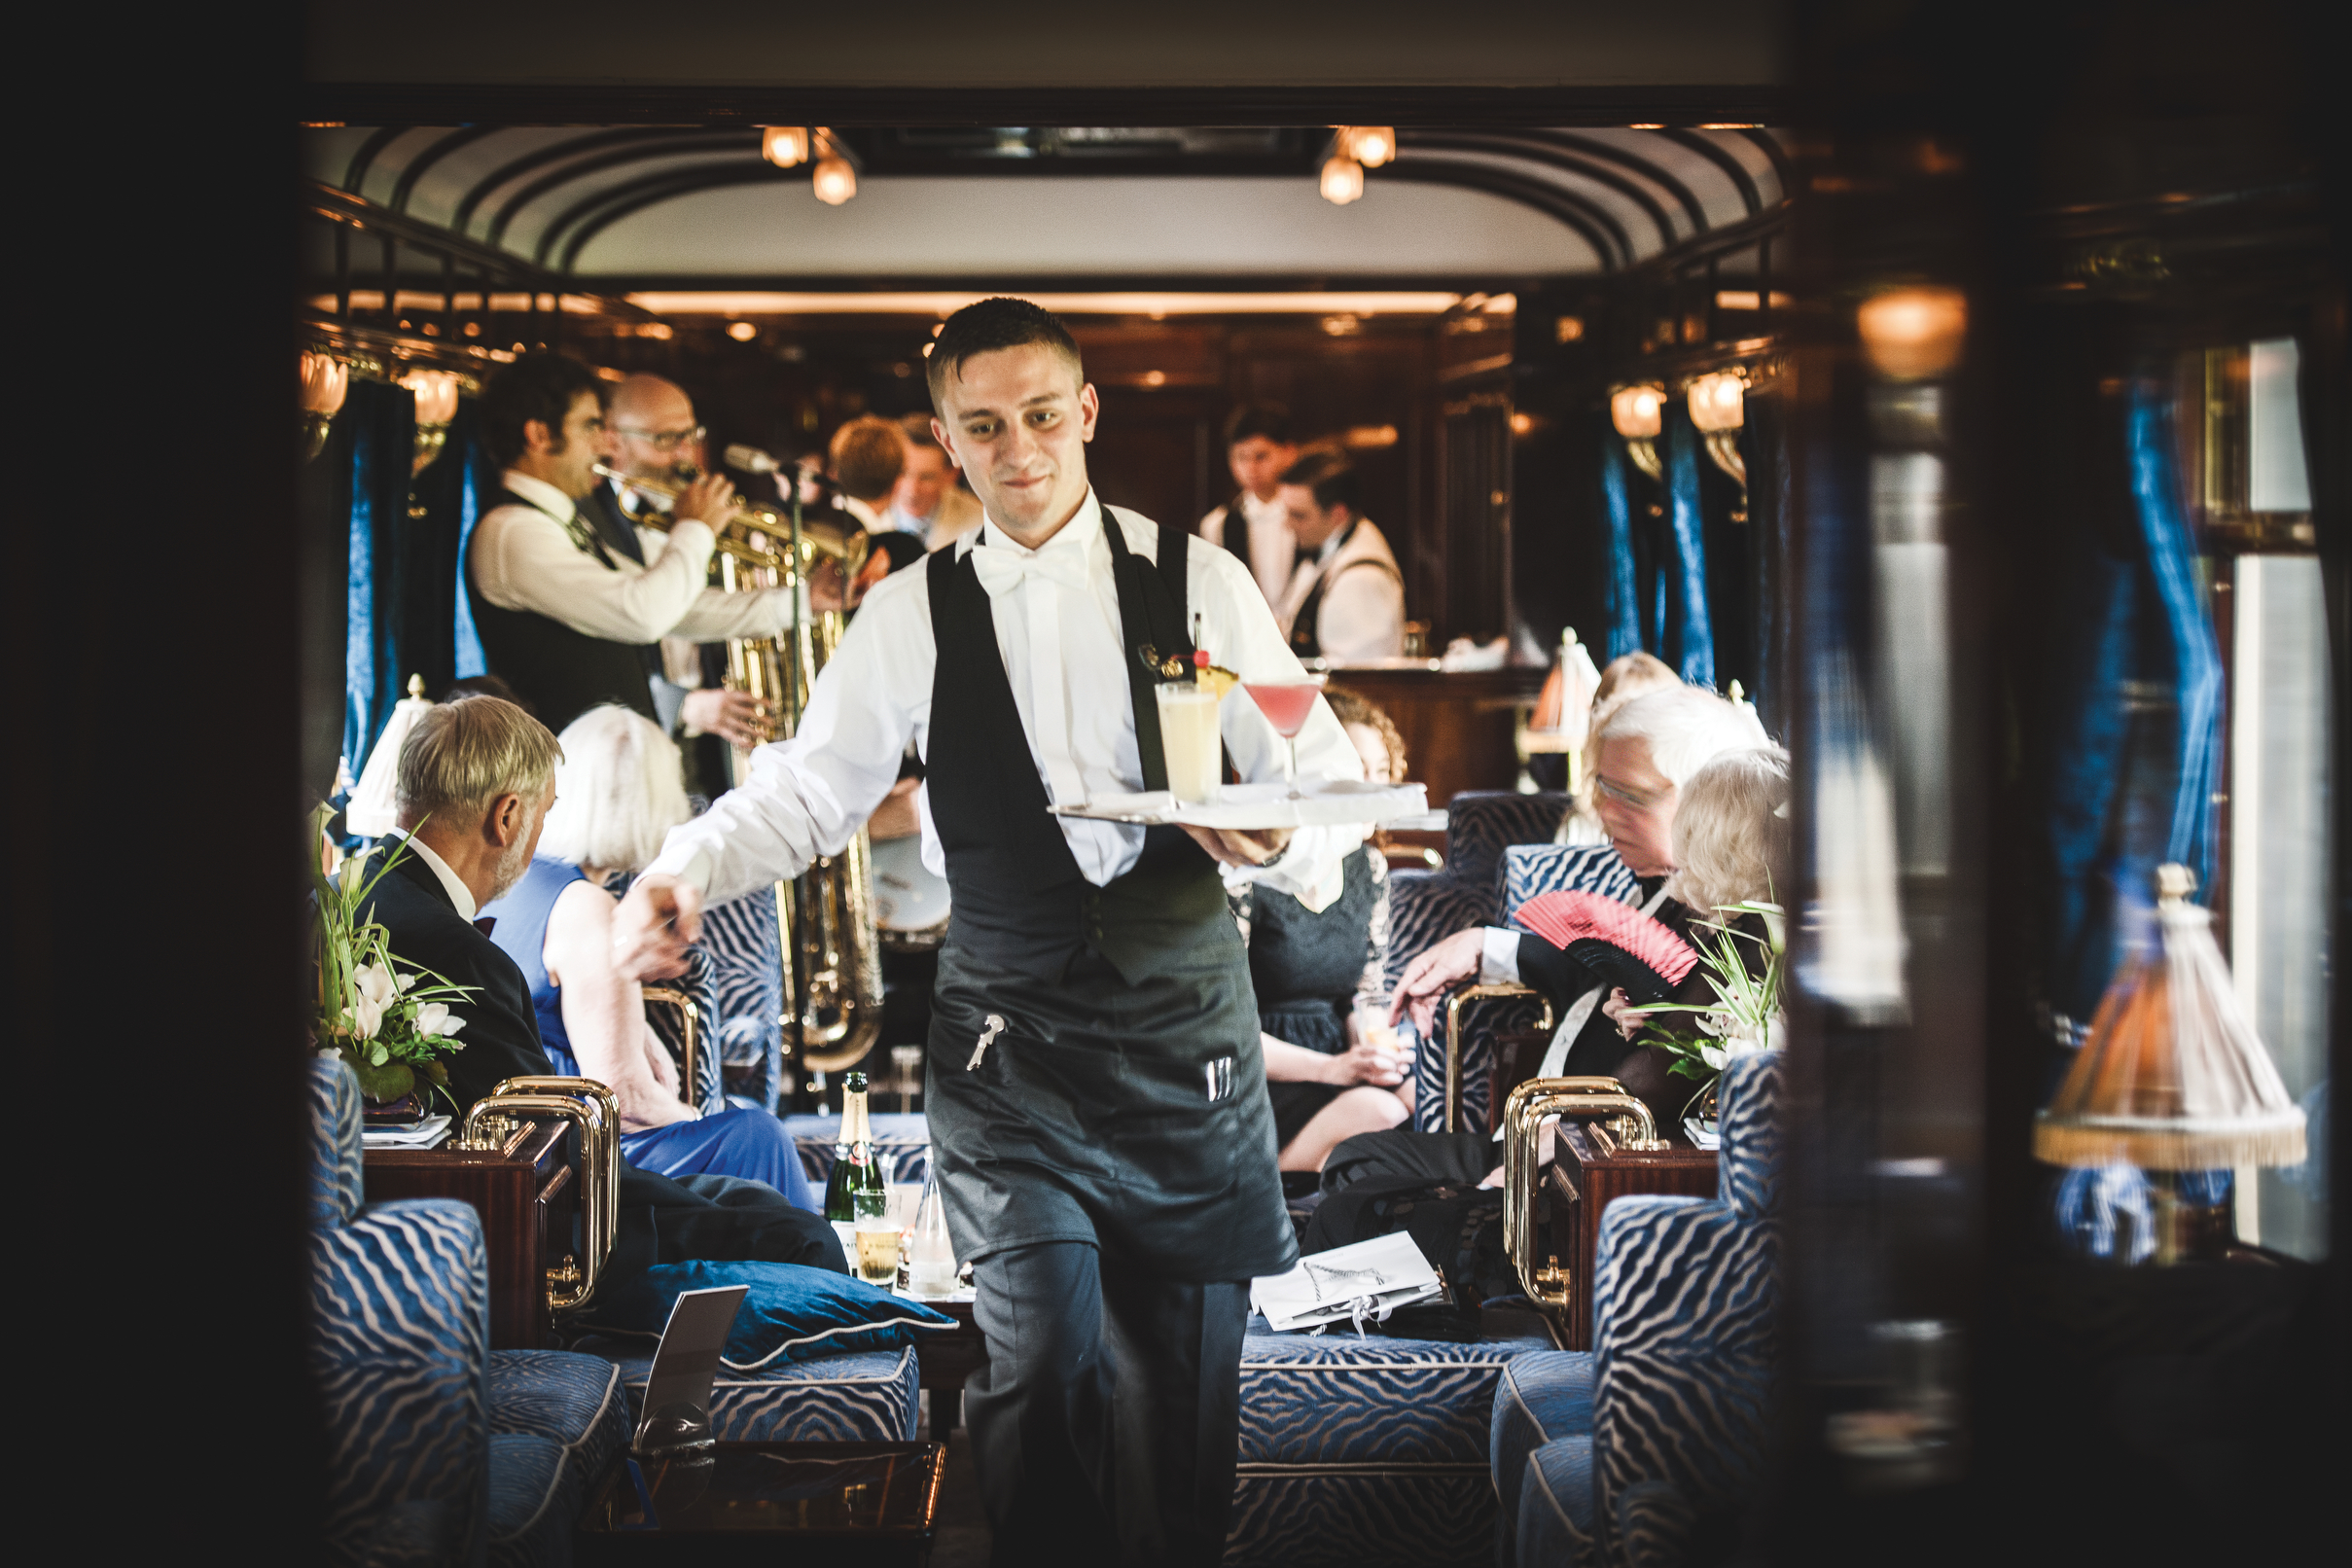 Welcome aboard the Venice-Simplon-Orient Express in Italy